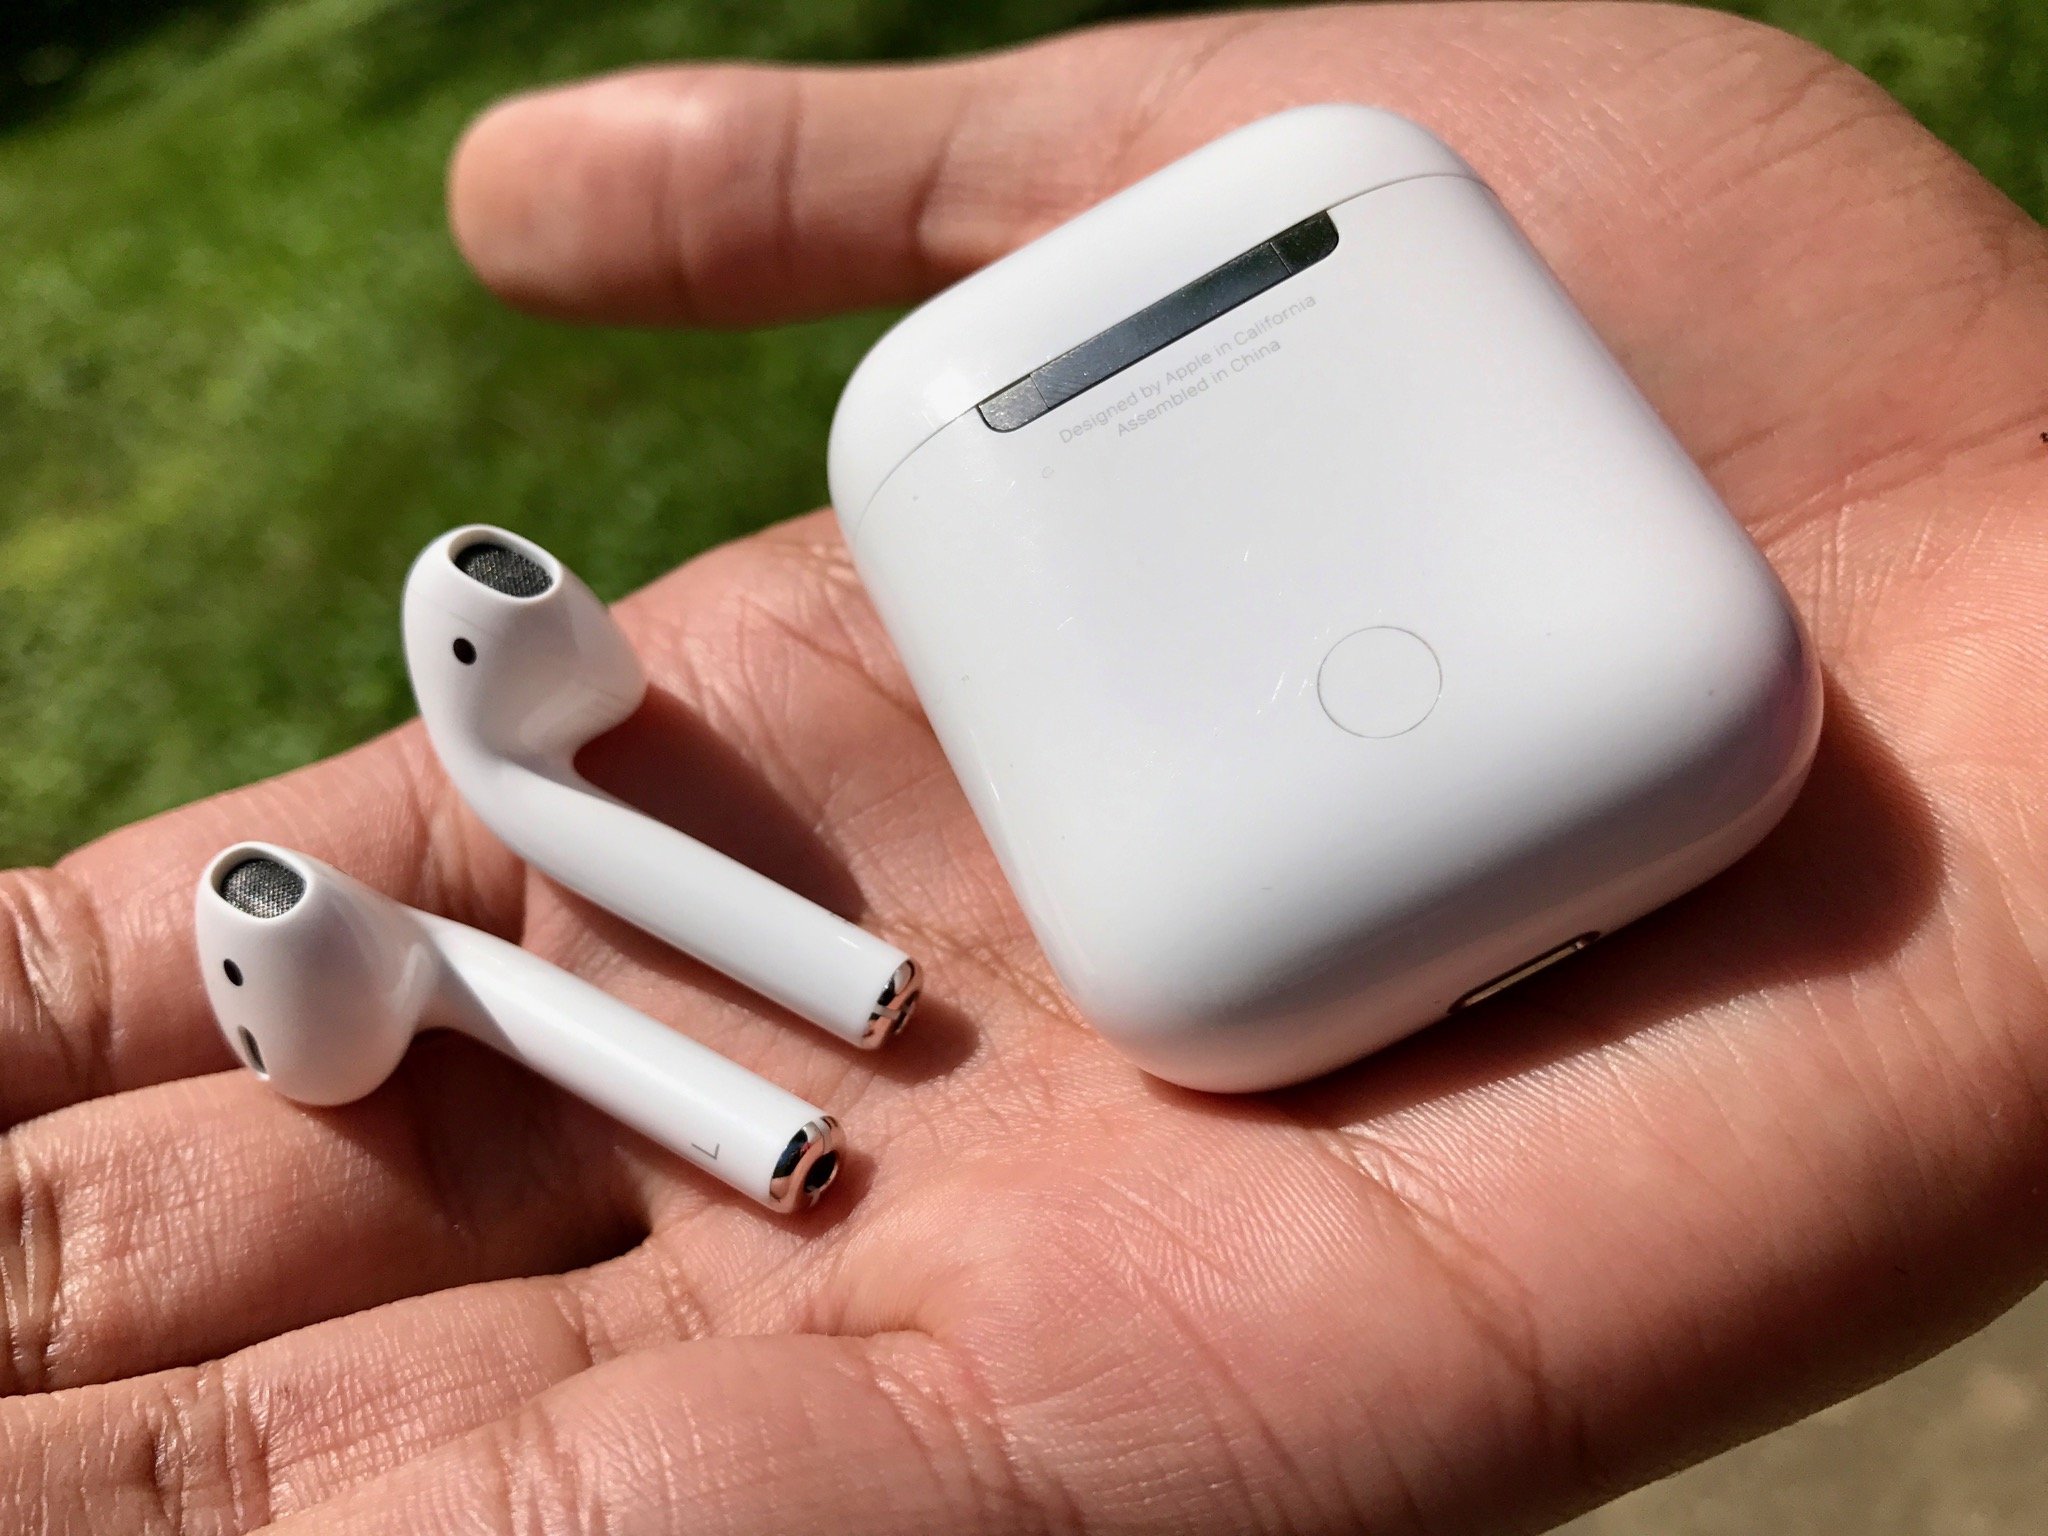 AirPods and case in a hand